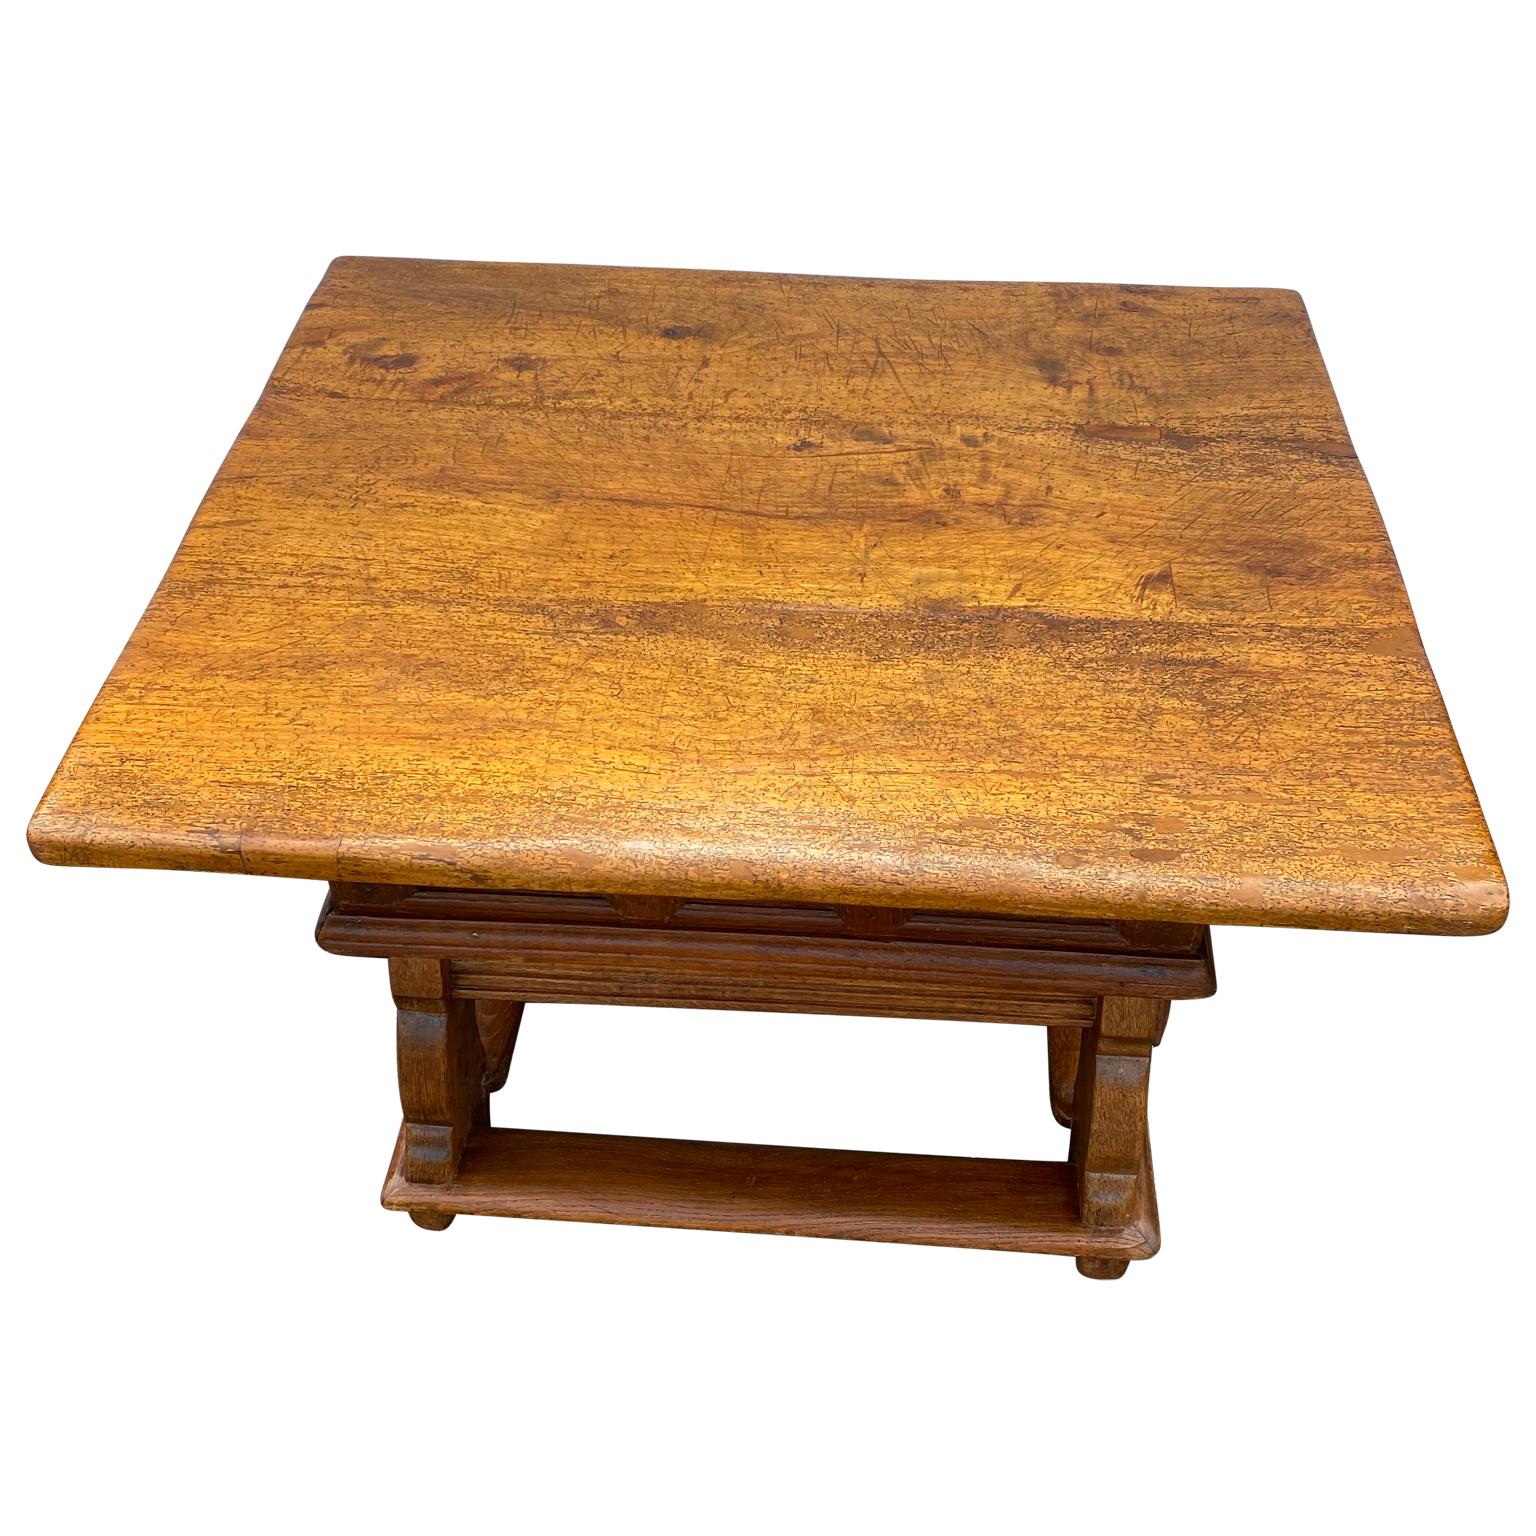 Baroque Early German 18th Century Refectory Table With Sliding Table-top 